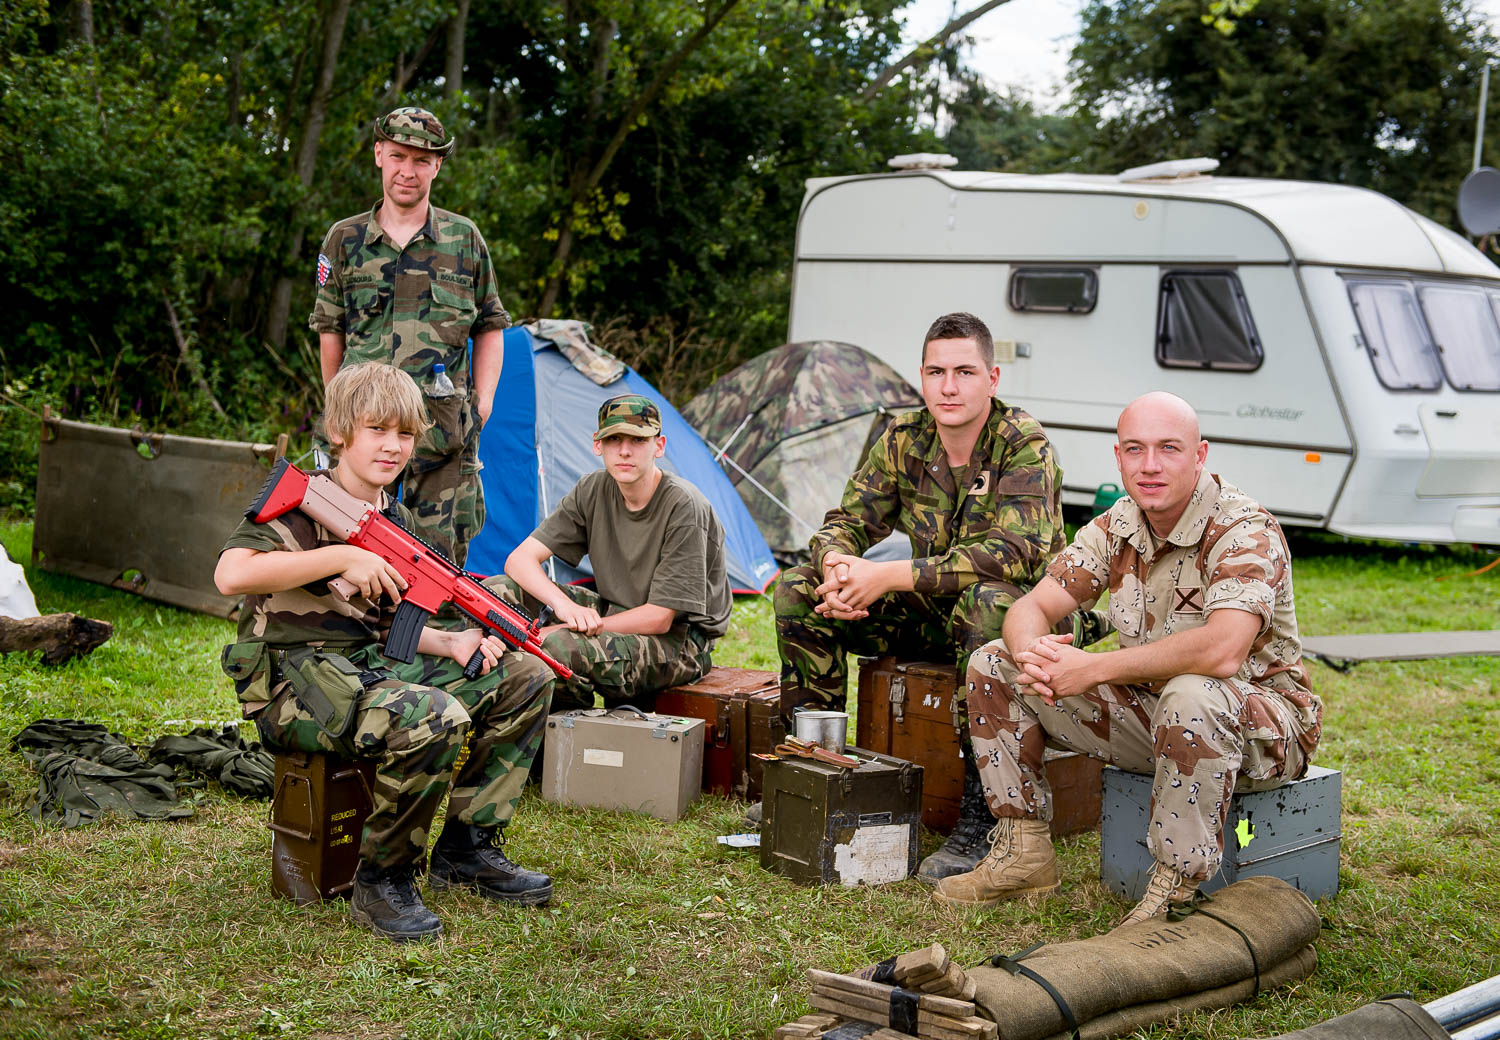  Campers, War and Peace show, Kent 